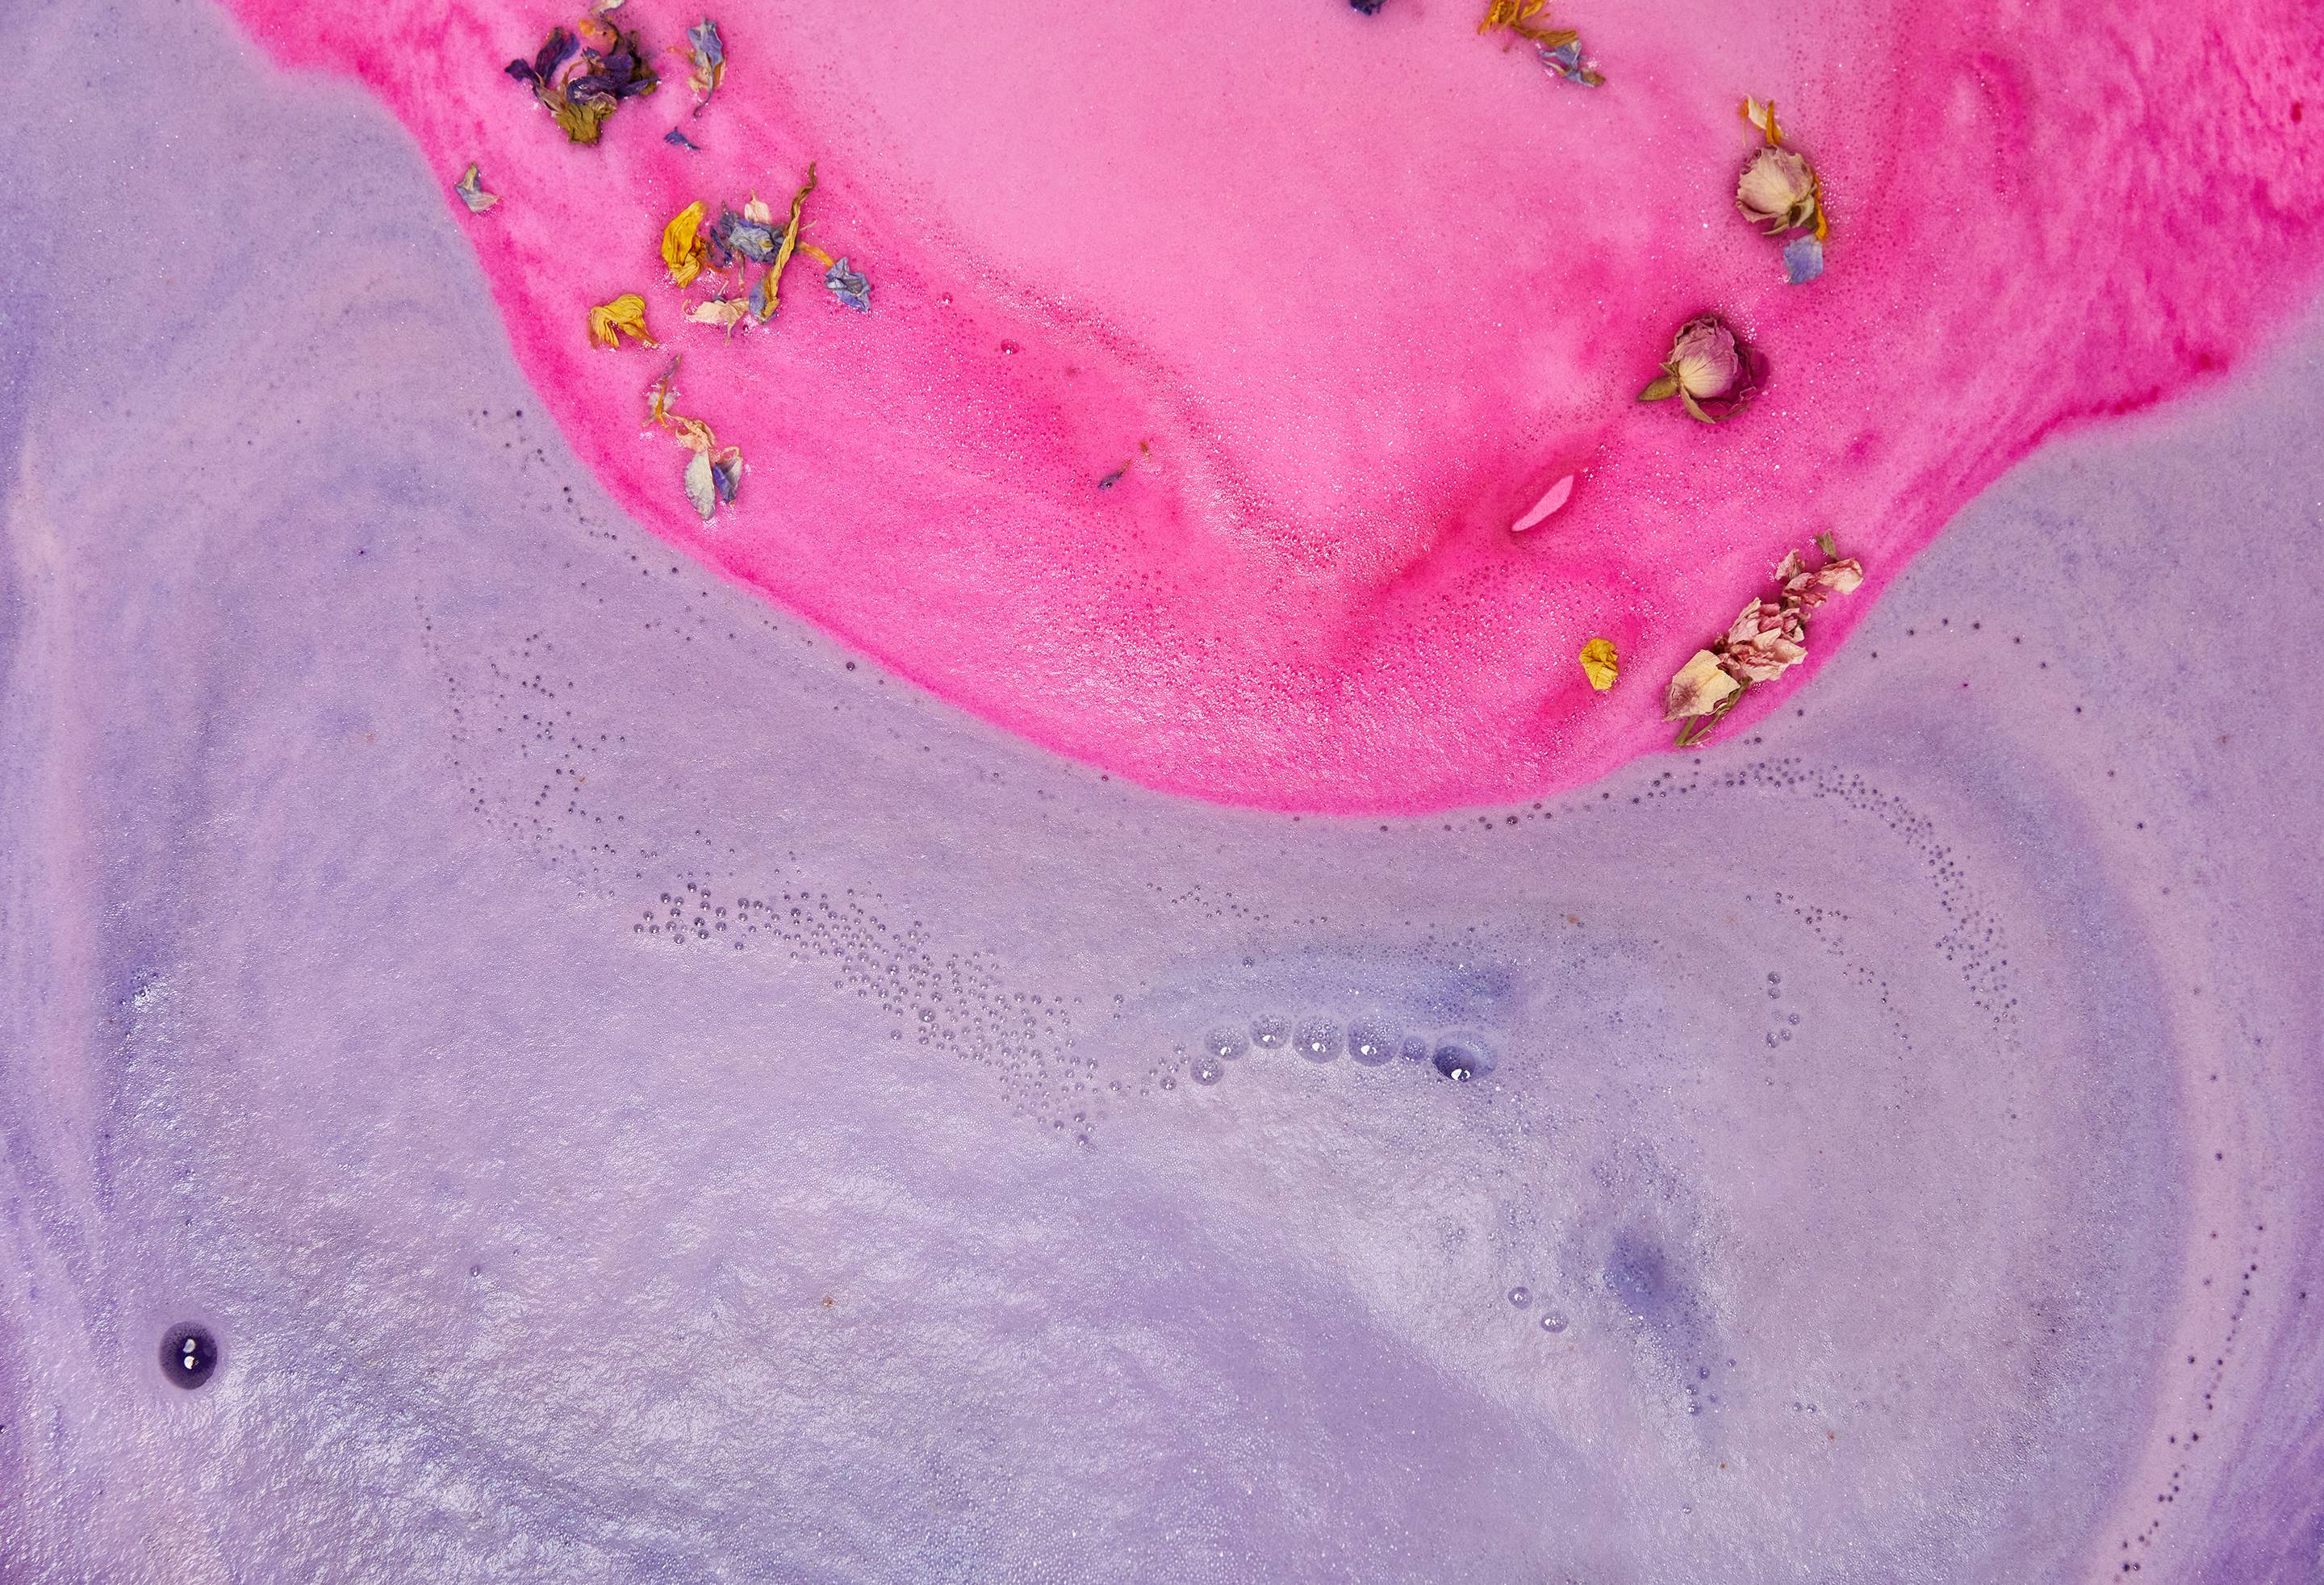 The Flower Bombshell has dissolved leaving two distinct sections of purple and pink foam, scattered with petals and flowers.